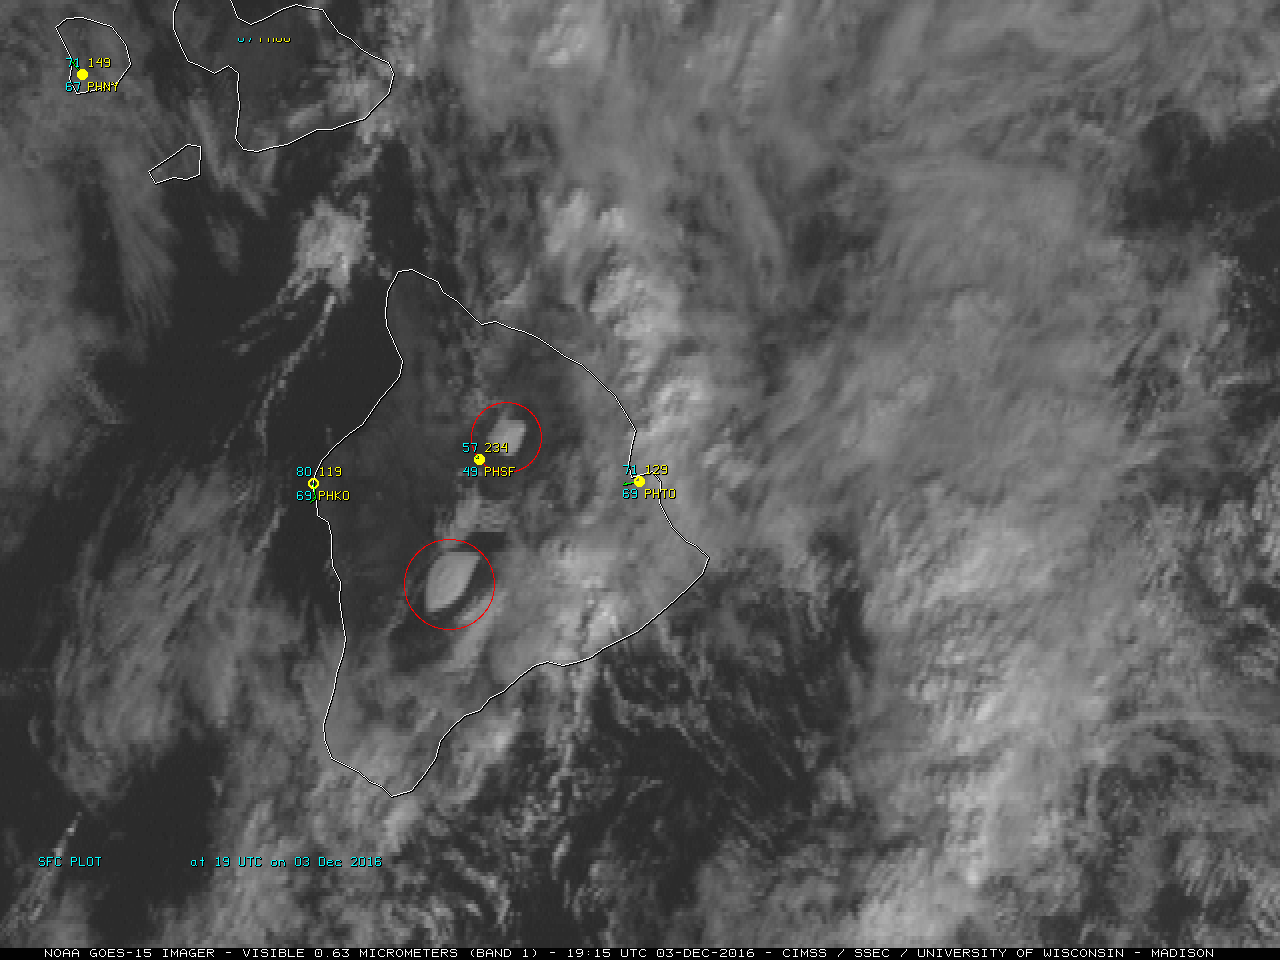 GOES-15 Visible (0.63 µm) images showing snow-covered peaks of Mauna Kea and Mauna Loa (circled in red) on the Big Island of Hawai’i, December 3, 2016.